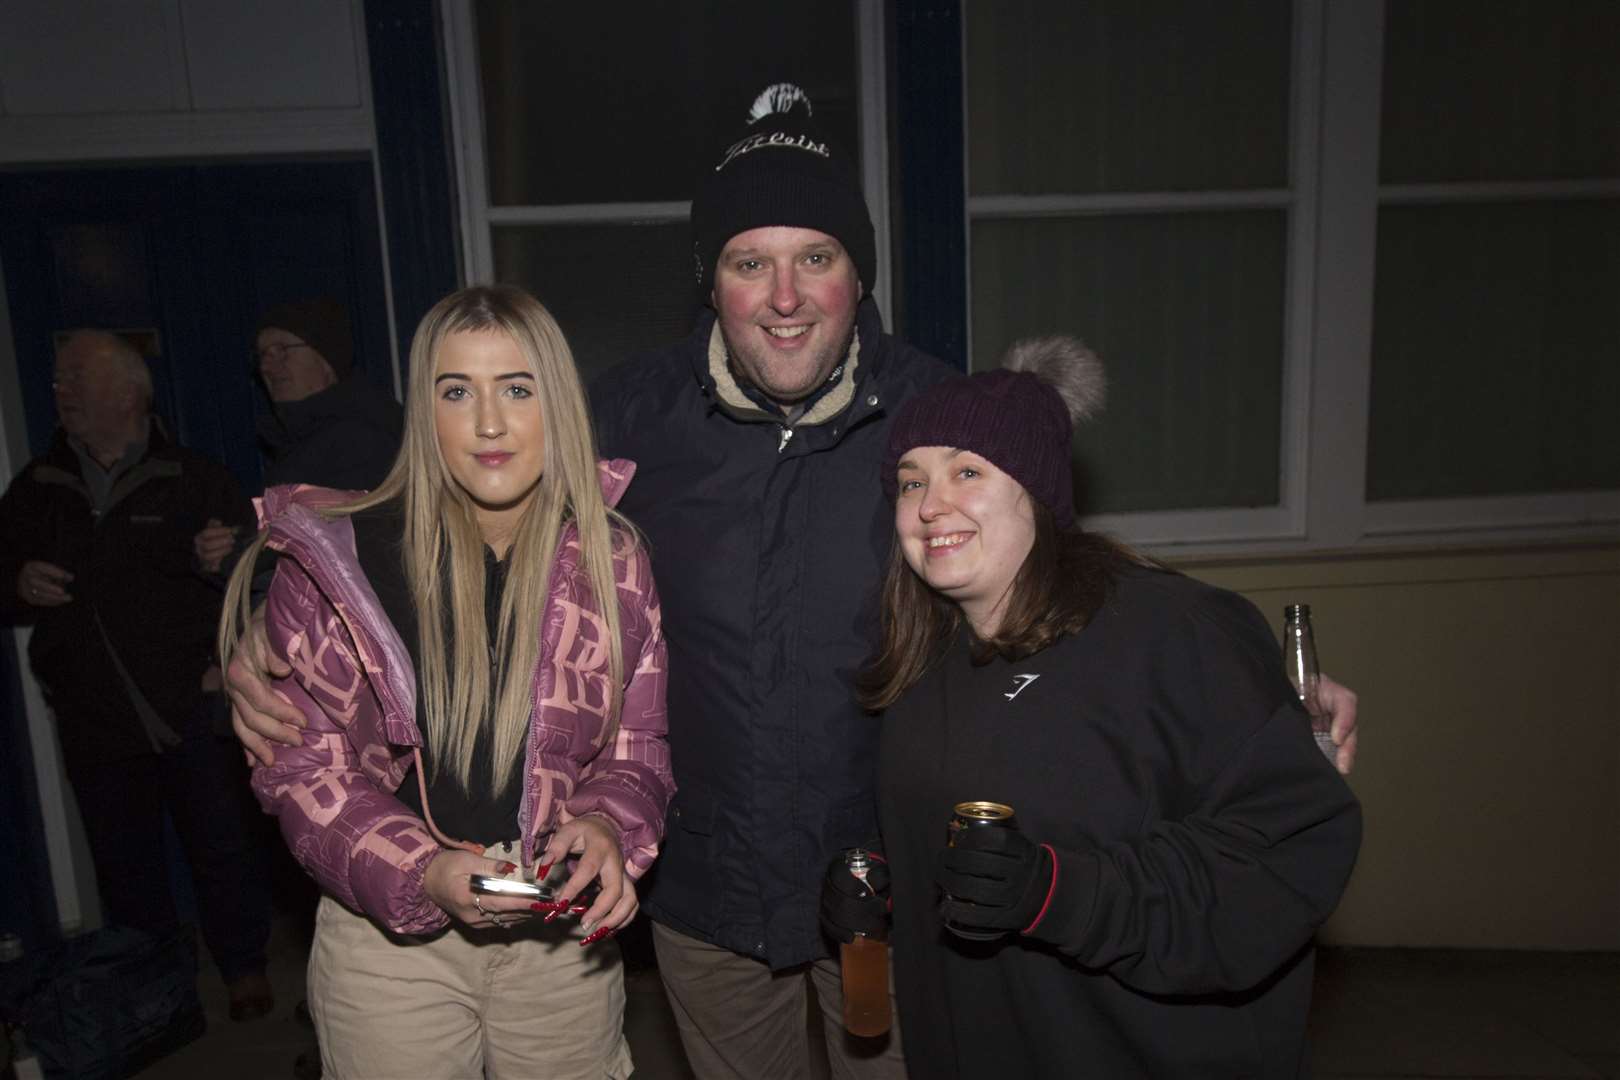 A Happy New Year for a trio of street party goers. Photo: Robert MacDonald/Northern Studios